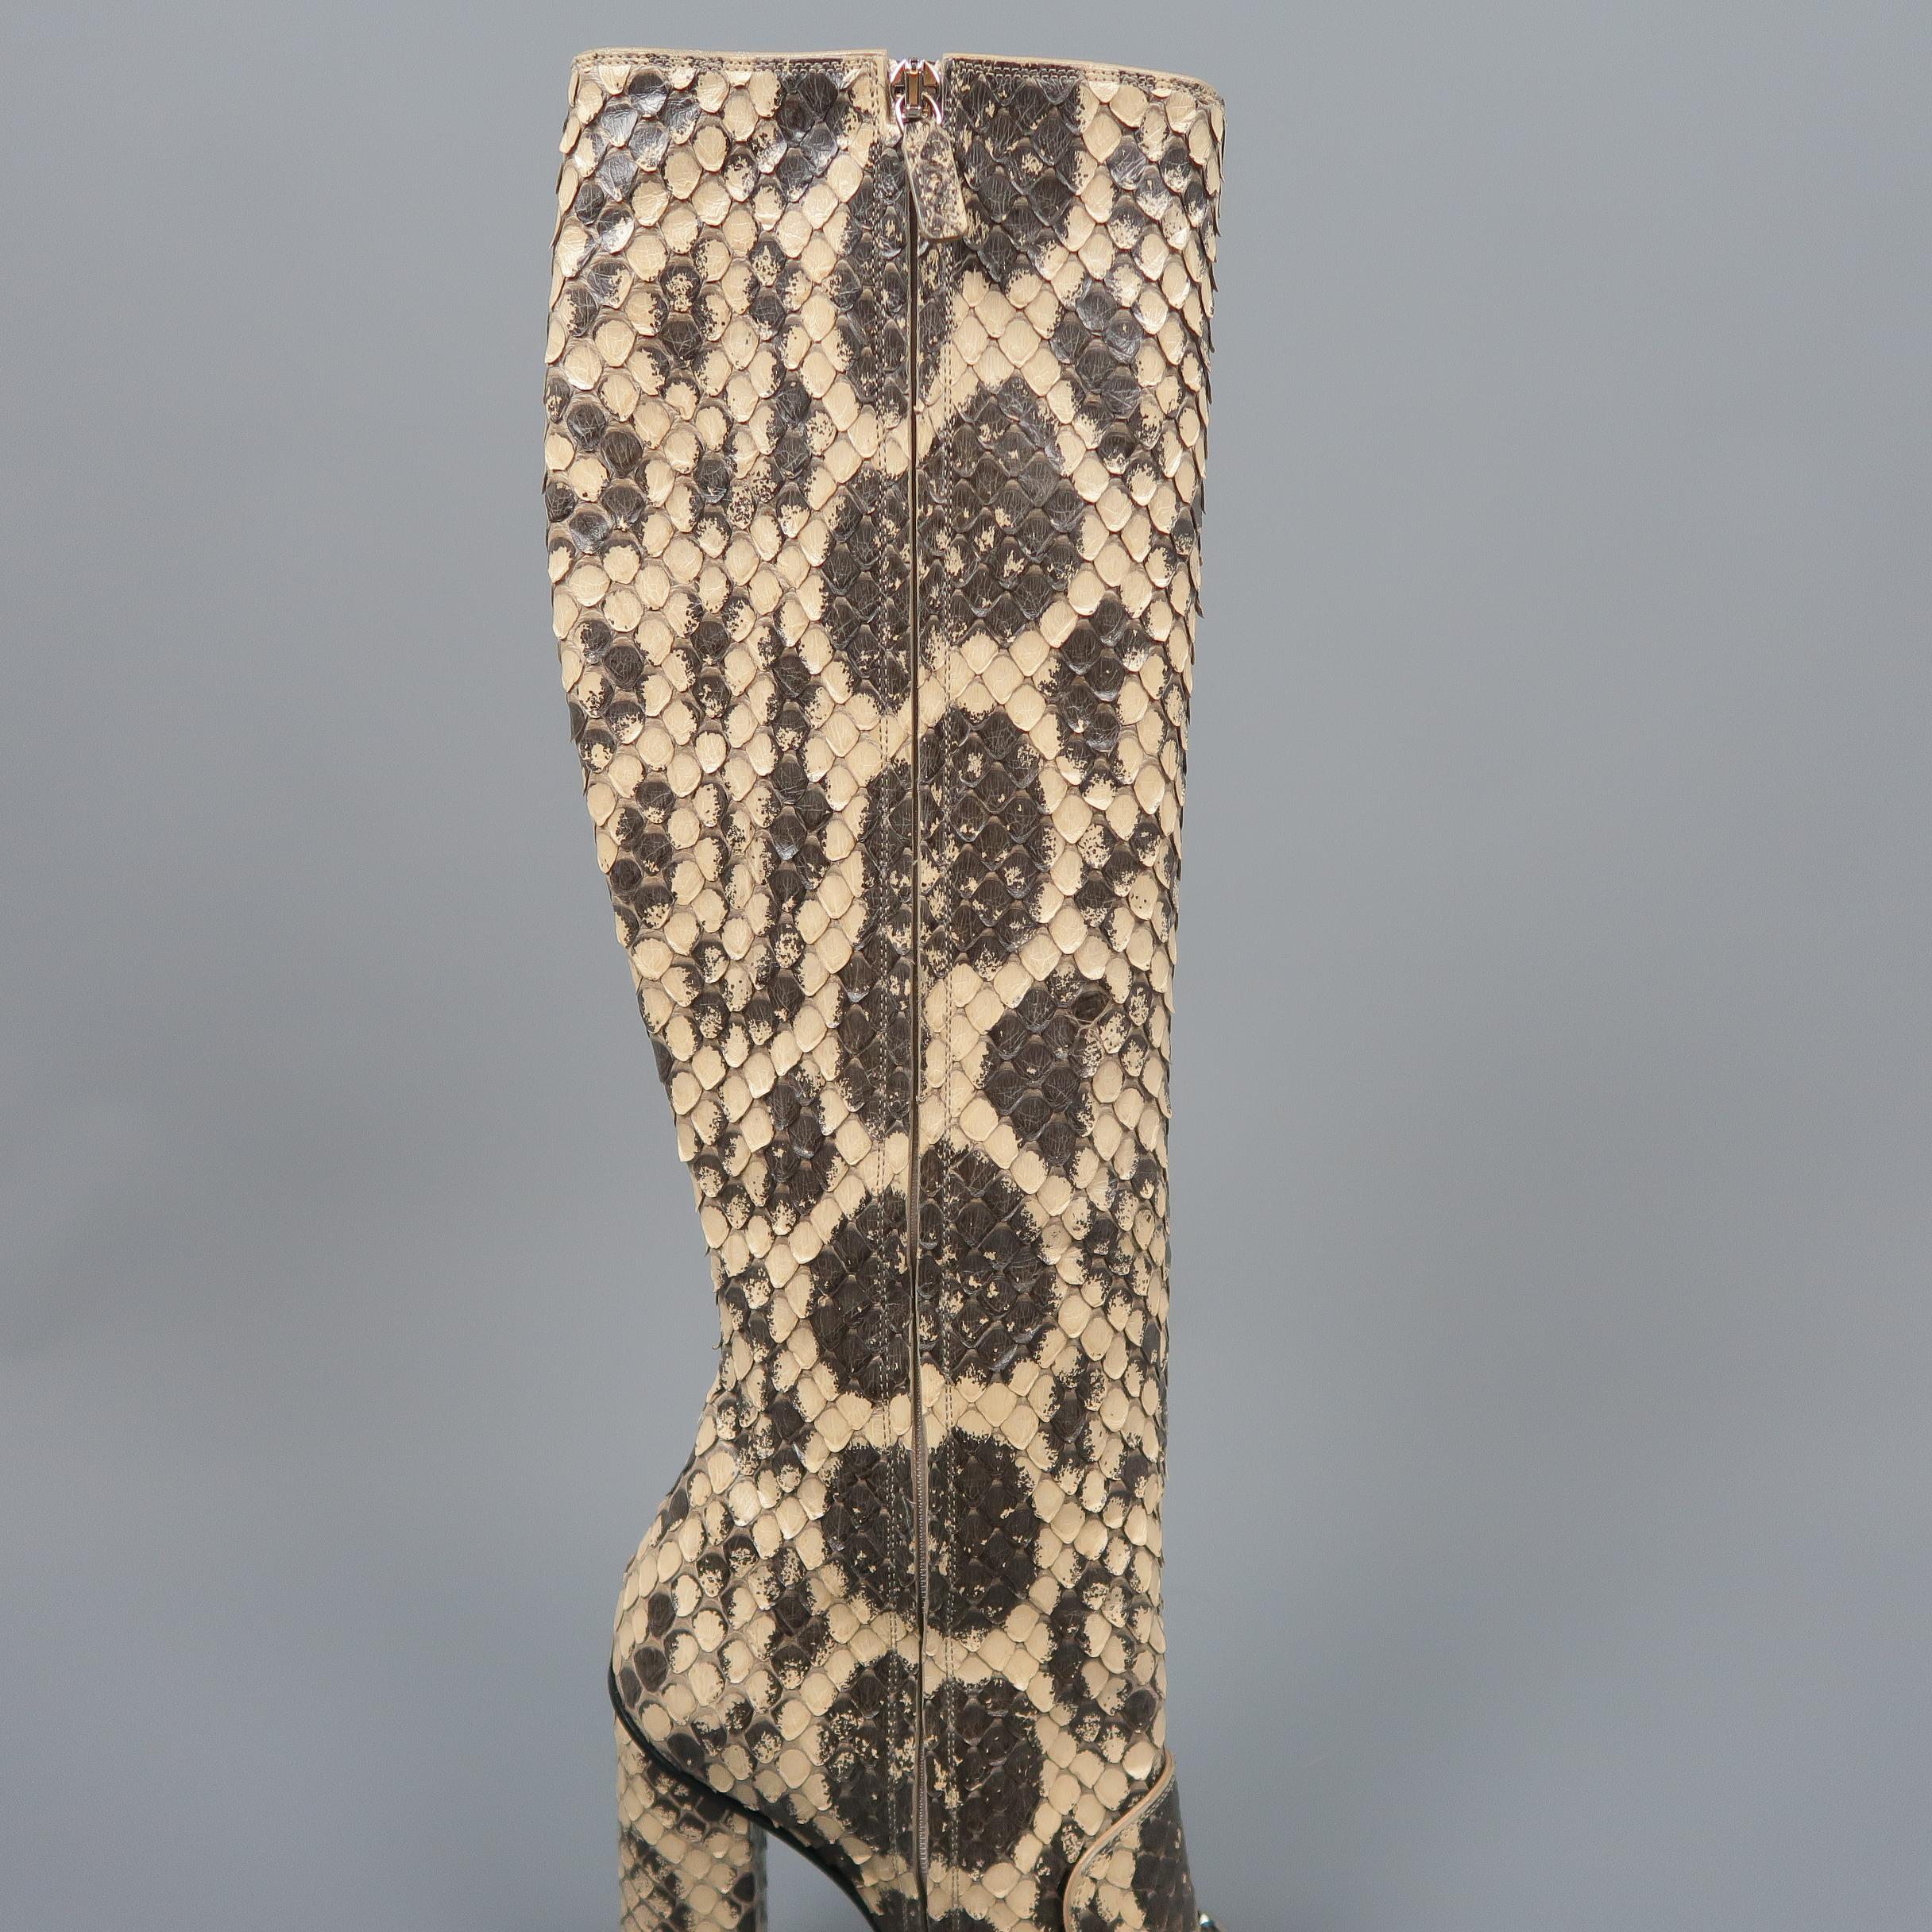 GUCCI Size 7.5 Beige Phython Snakeskin Leather Horsebit Knee High Boots 7